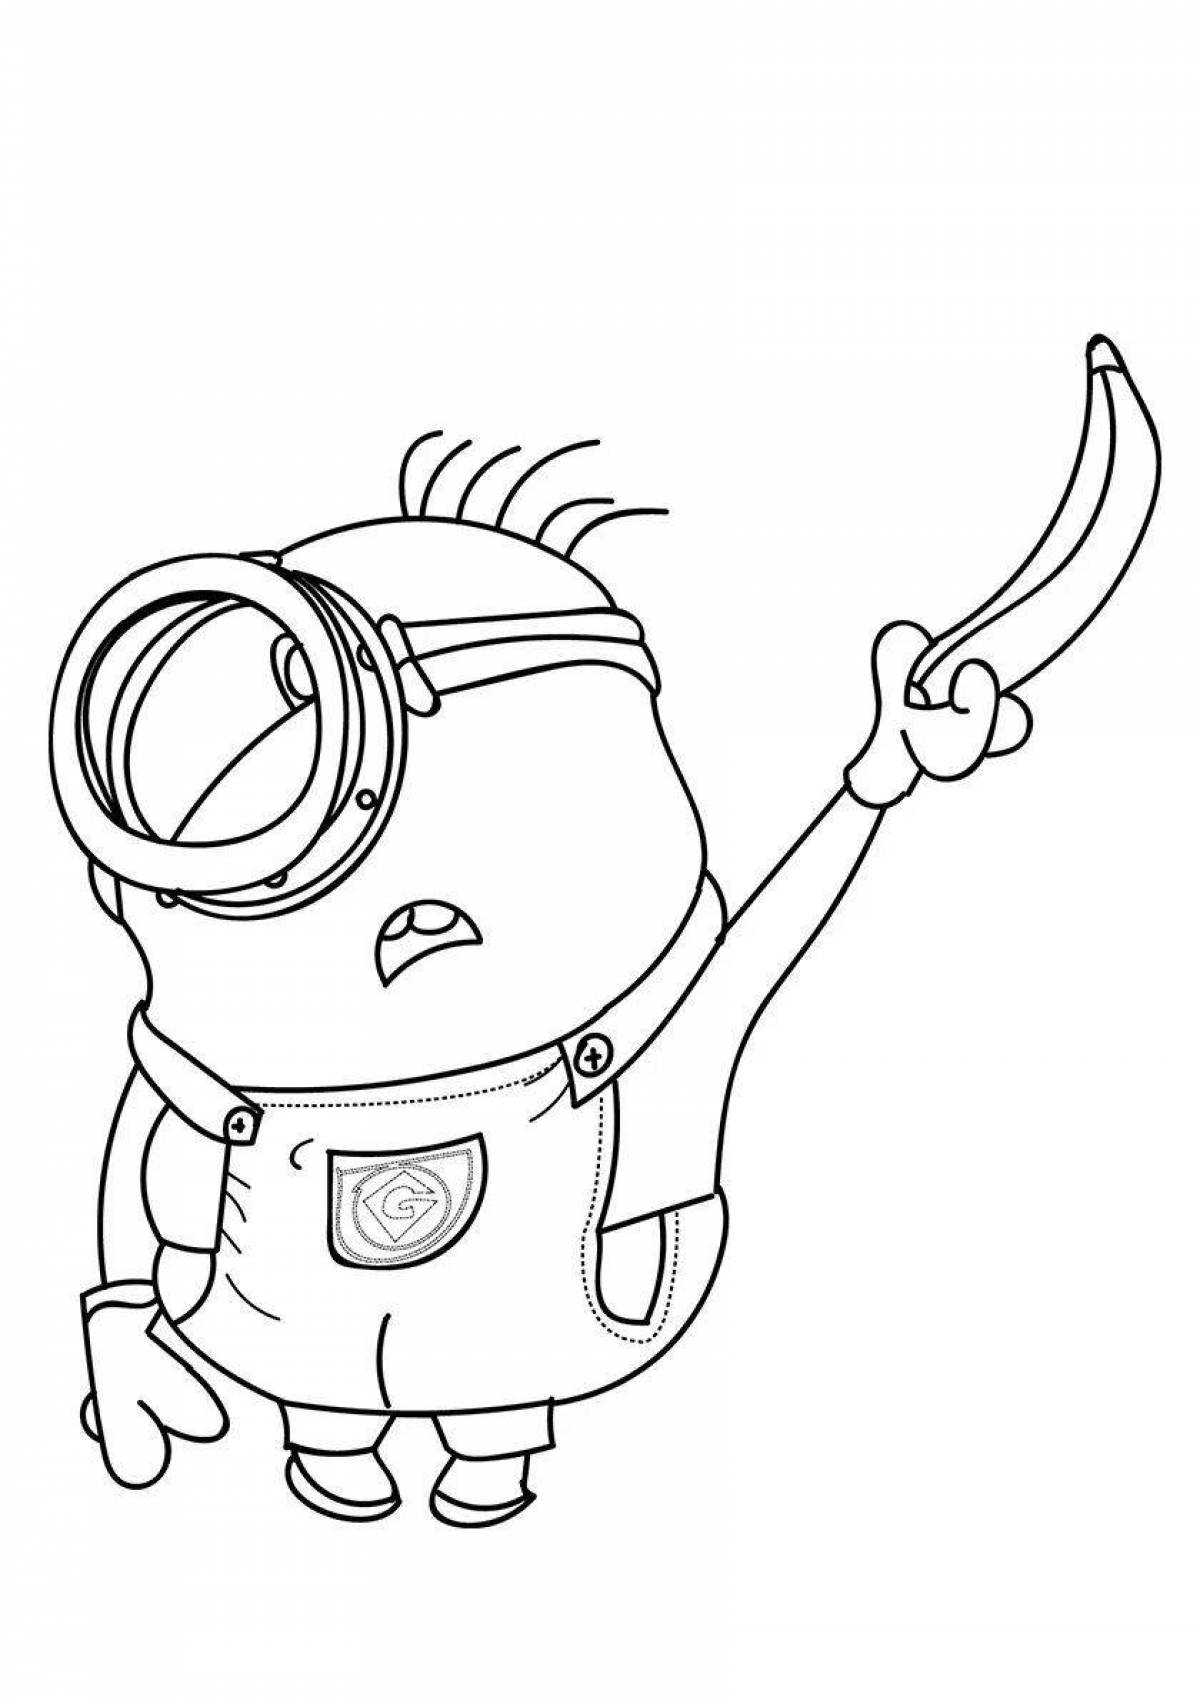 Adorable minion coloring pages